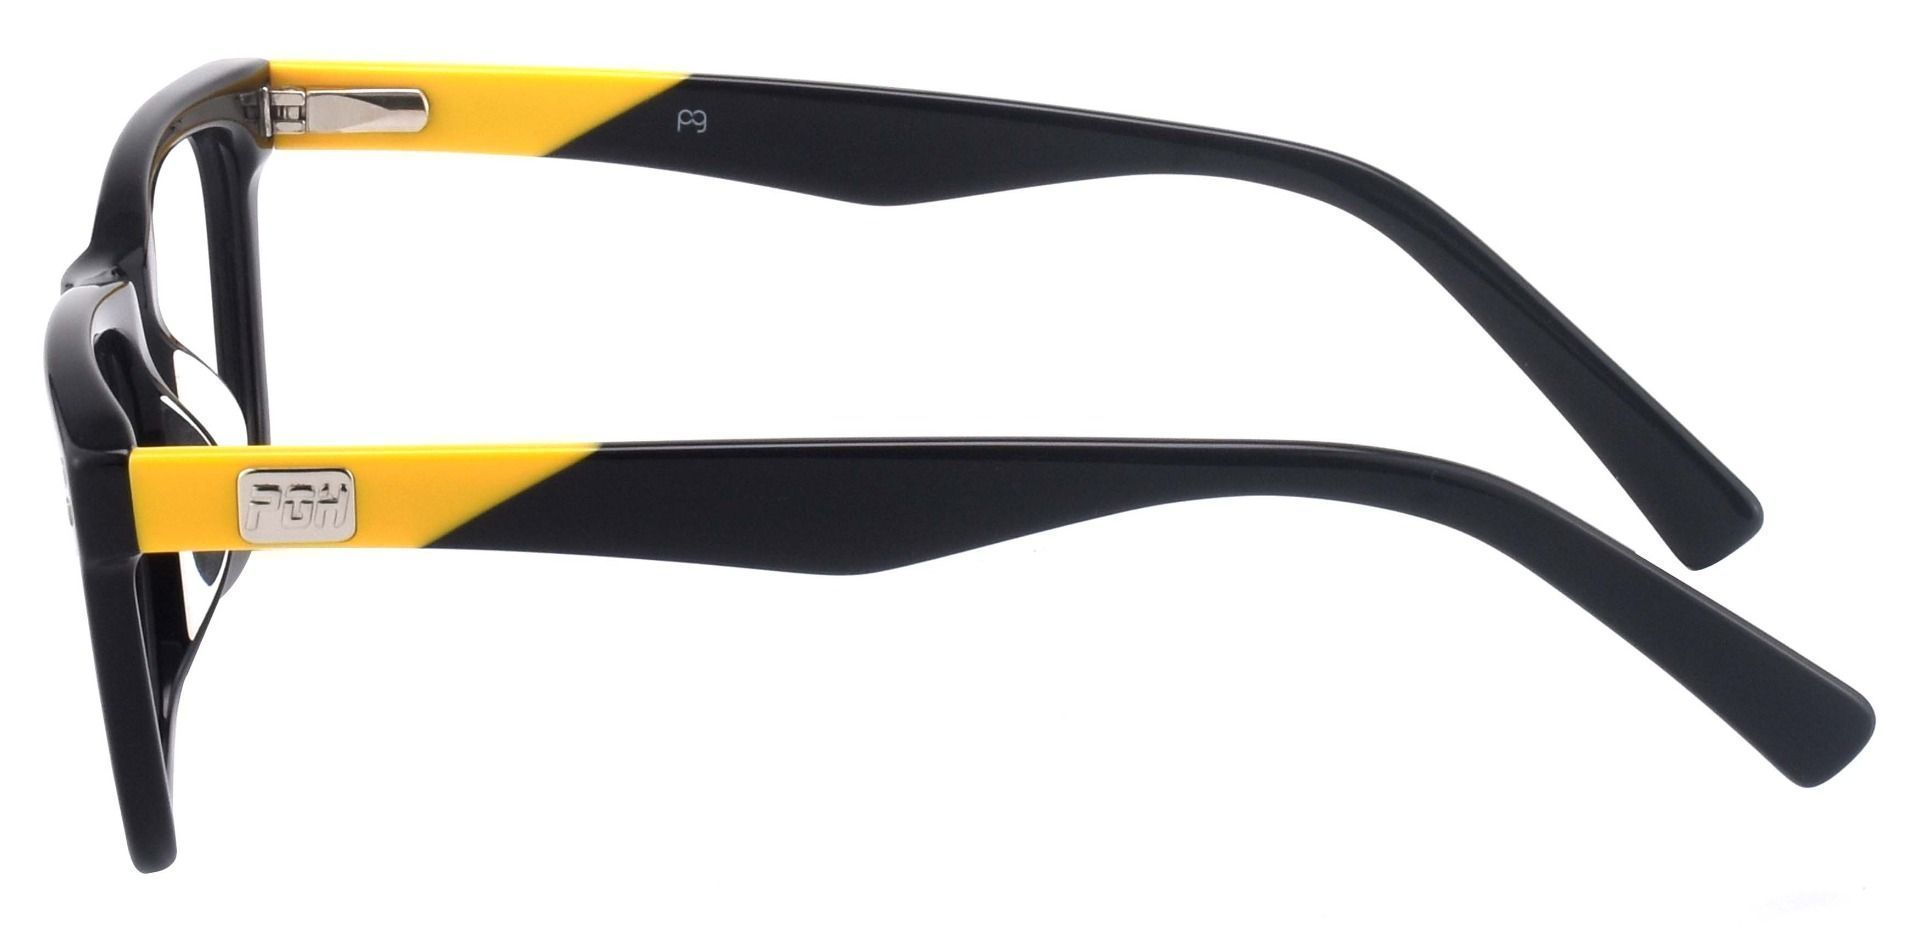 Liberty Rectangle Lined Bifocal Glasses - The Frame Is Black And Gold